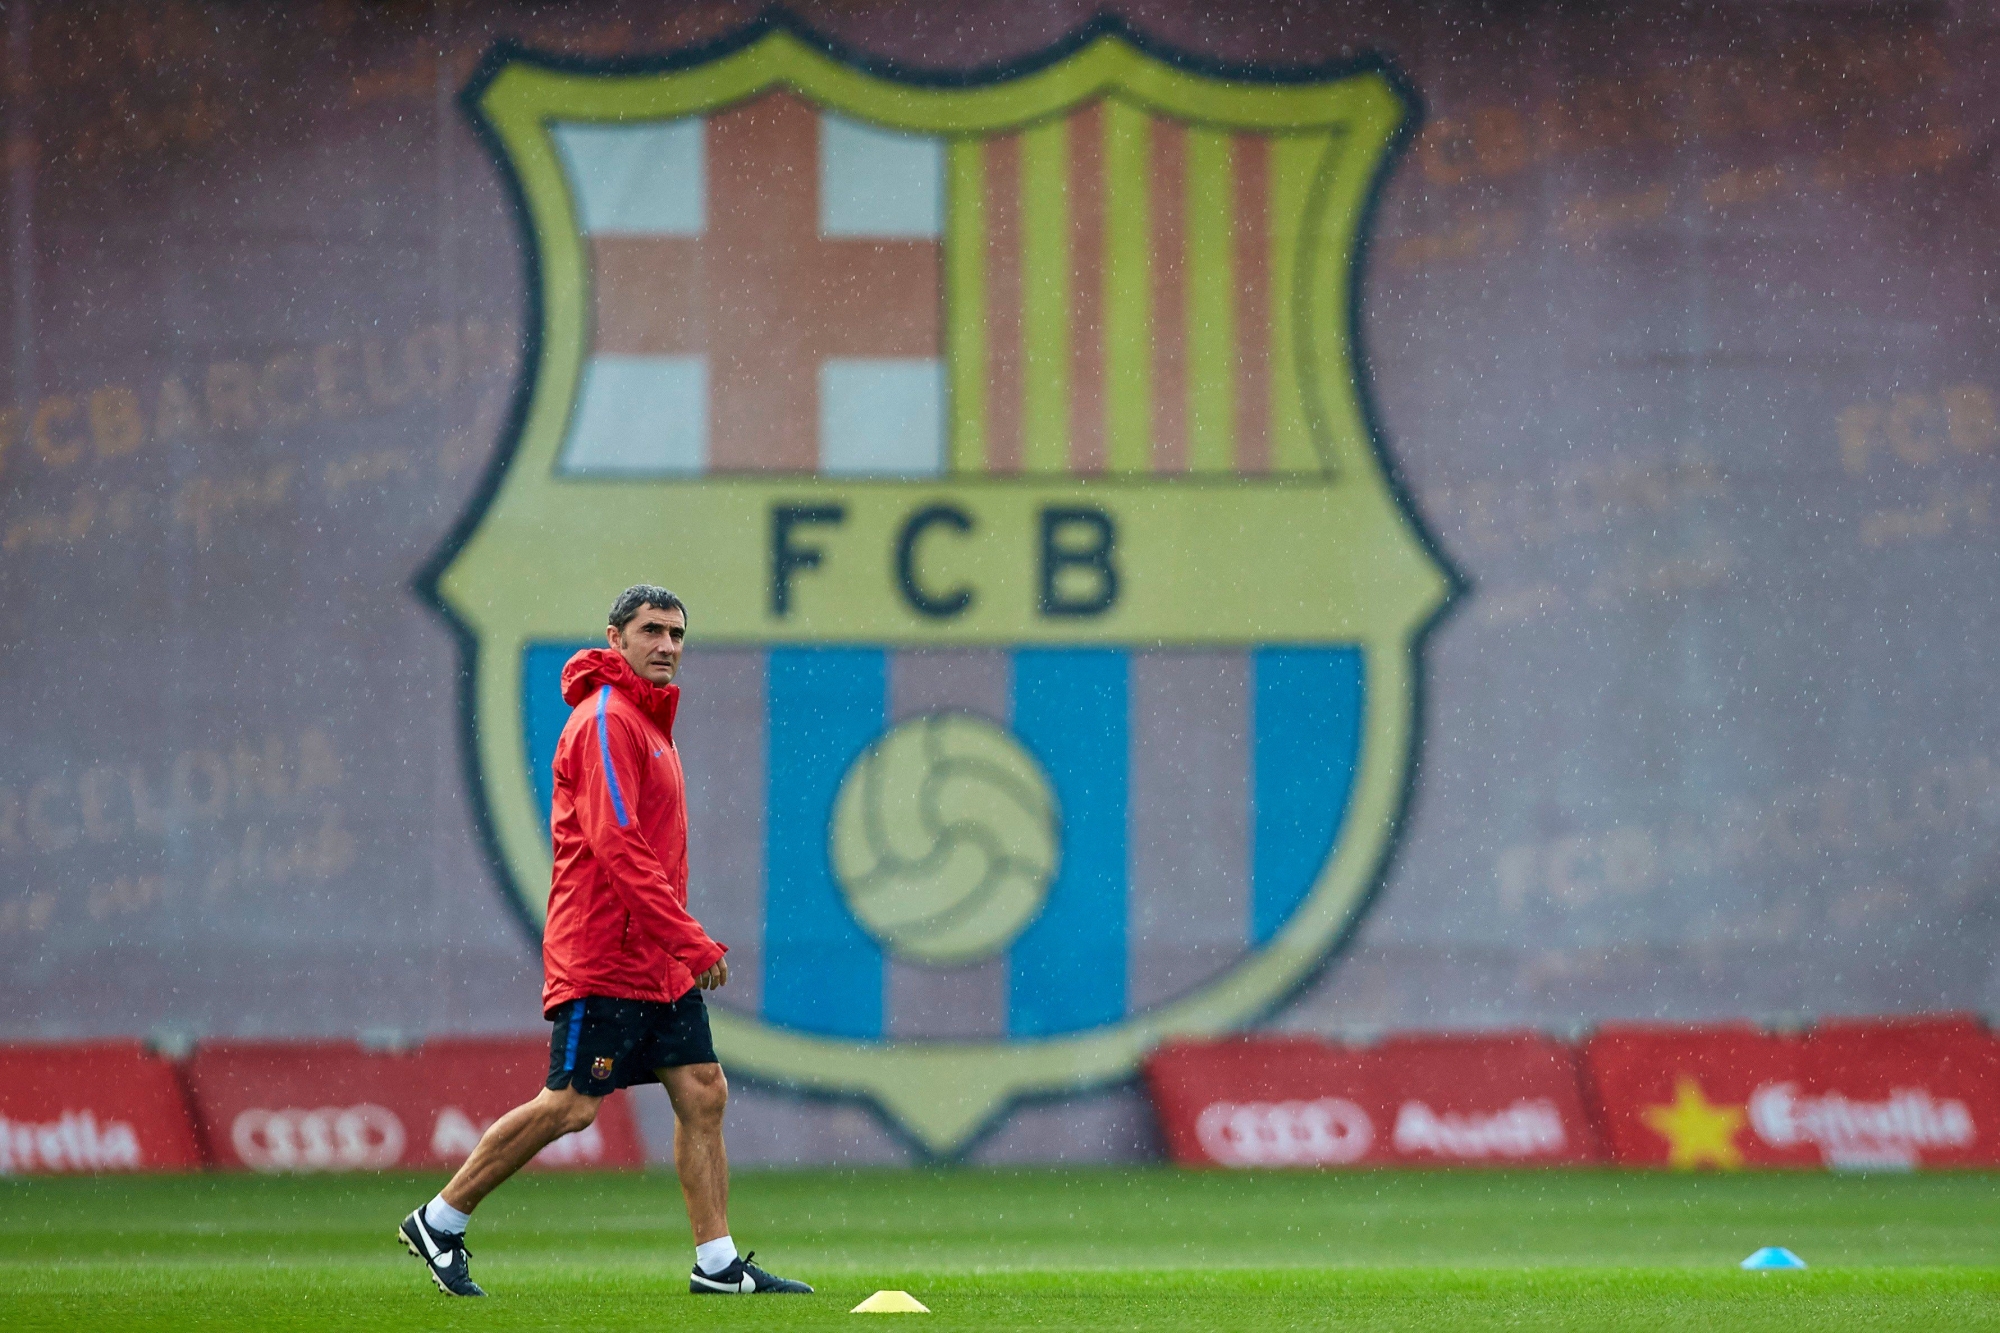 epa06236462 FC Barcelona's head coach Ernesto Valverde supervises his players during a training session at the team's Joan Gamper facilities, in Barcelona, northeastern Spain, on 30 September 2017. FC Barcelona will face Union Deportivo Las Palmas in a Spanish Primera Division League's soccer match on 01 October 2017.  EPA/Alejandro Garcia SPAIN SOCCER PRIMERA DIVISION